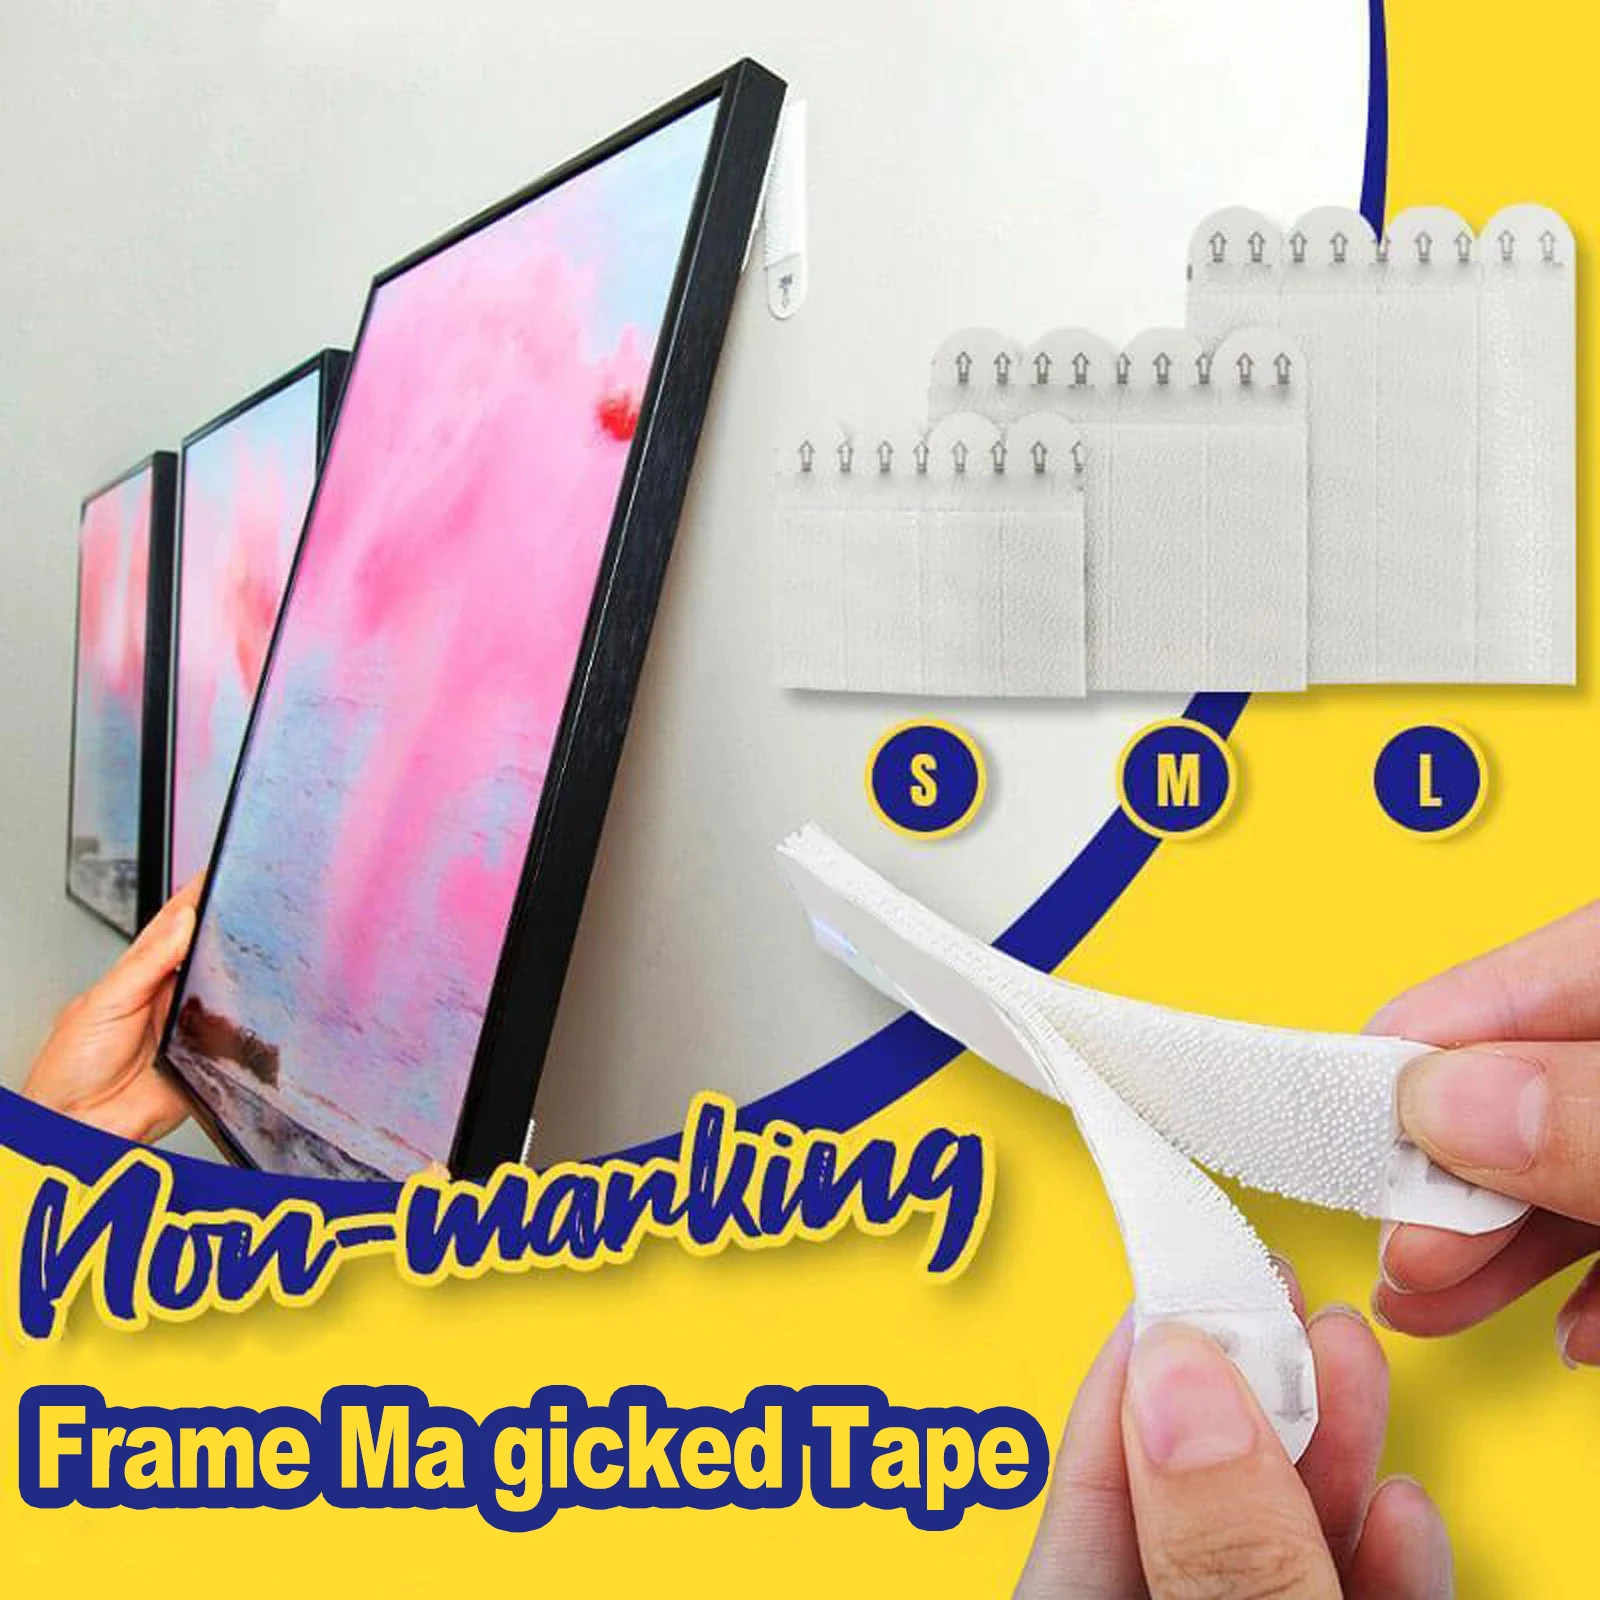 

24pcs（12sets) Self Adhesive Sticker Strips for Picture Frame Sticker Damage-Free Picture&Frame Hanging Wall Ma gics Strips Tapes